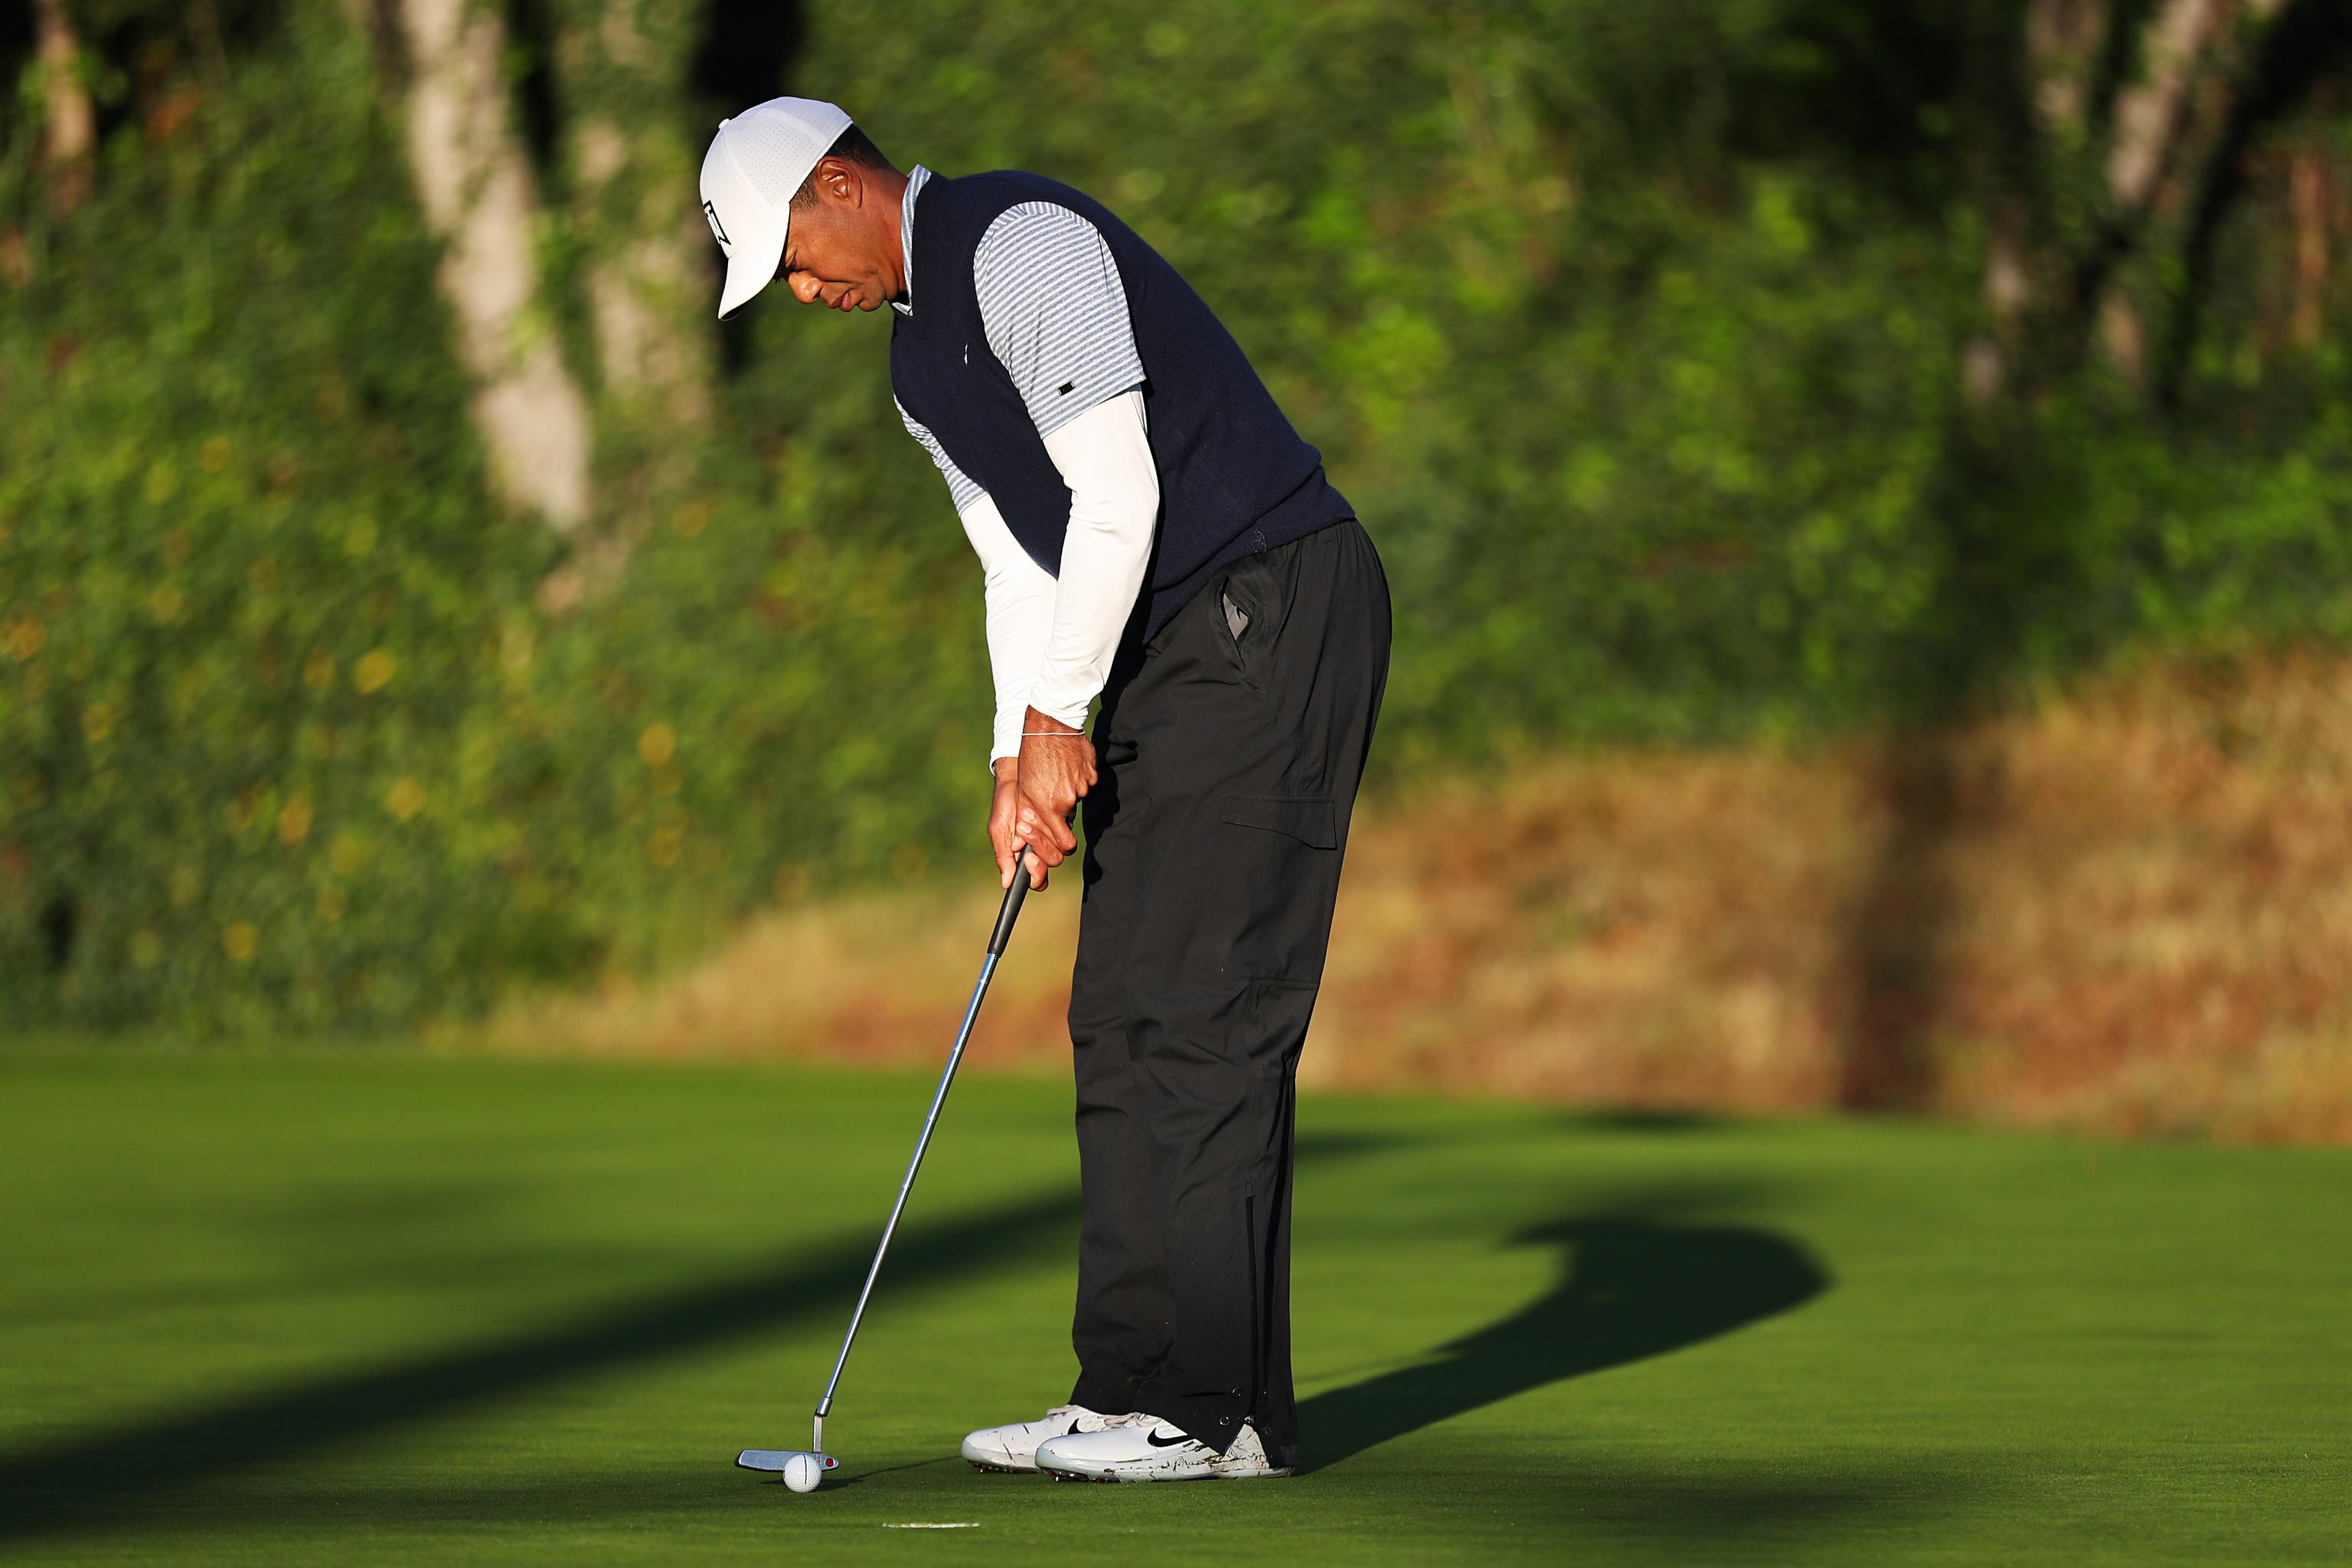 Tiger Woods 7 Strokes Back After Hot Start To Round 3 At 2019 Genesis Open Bleacher Report Latest News Videos And Highlights